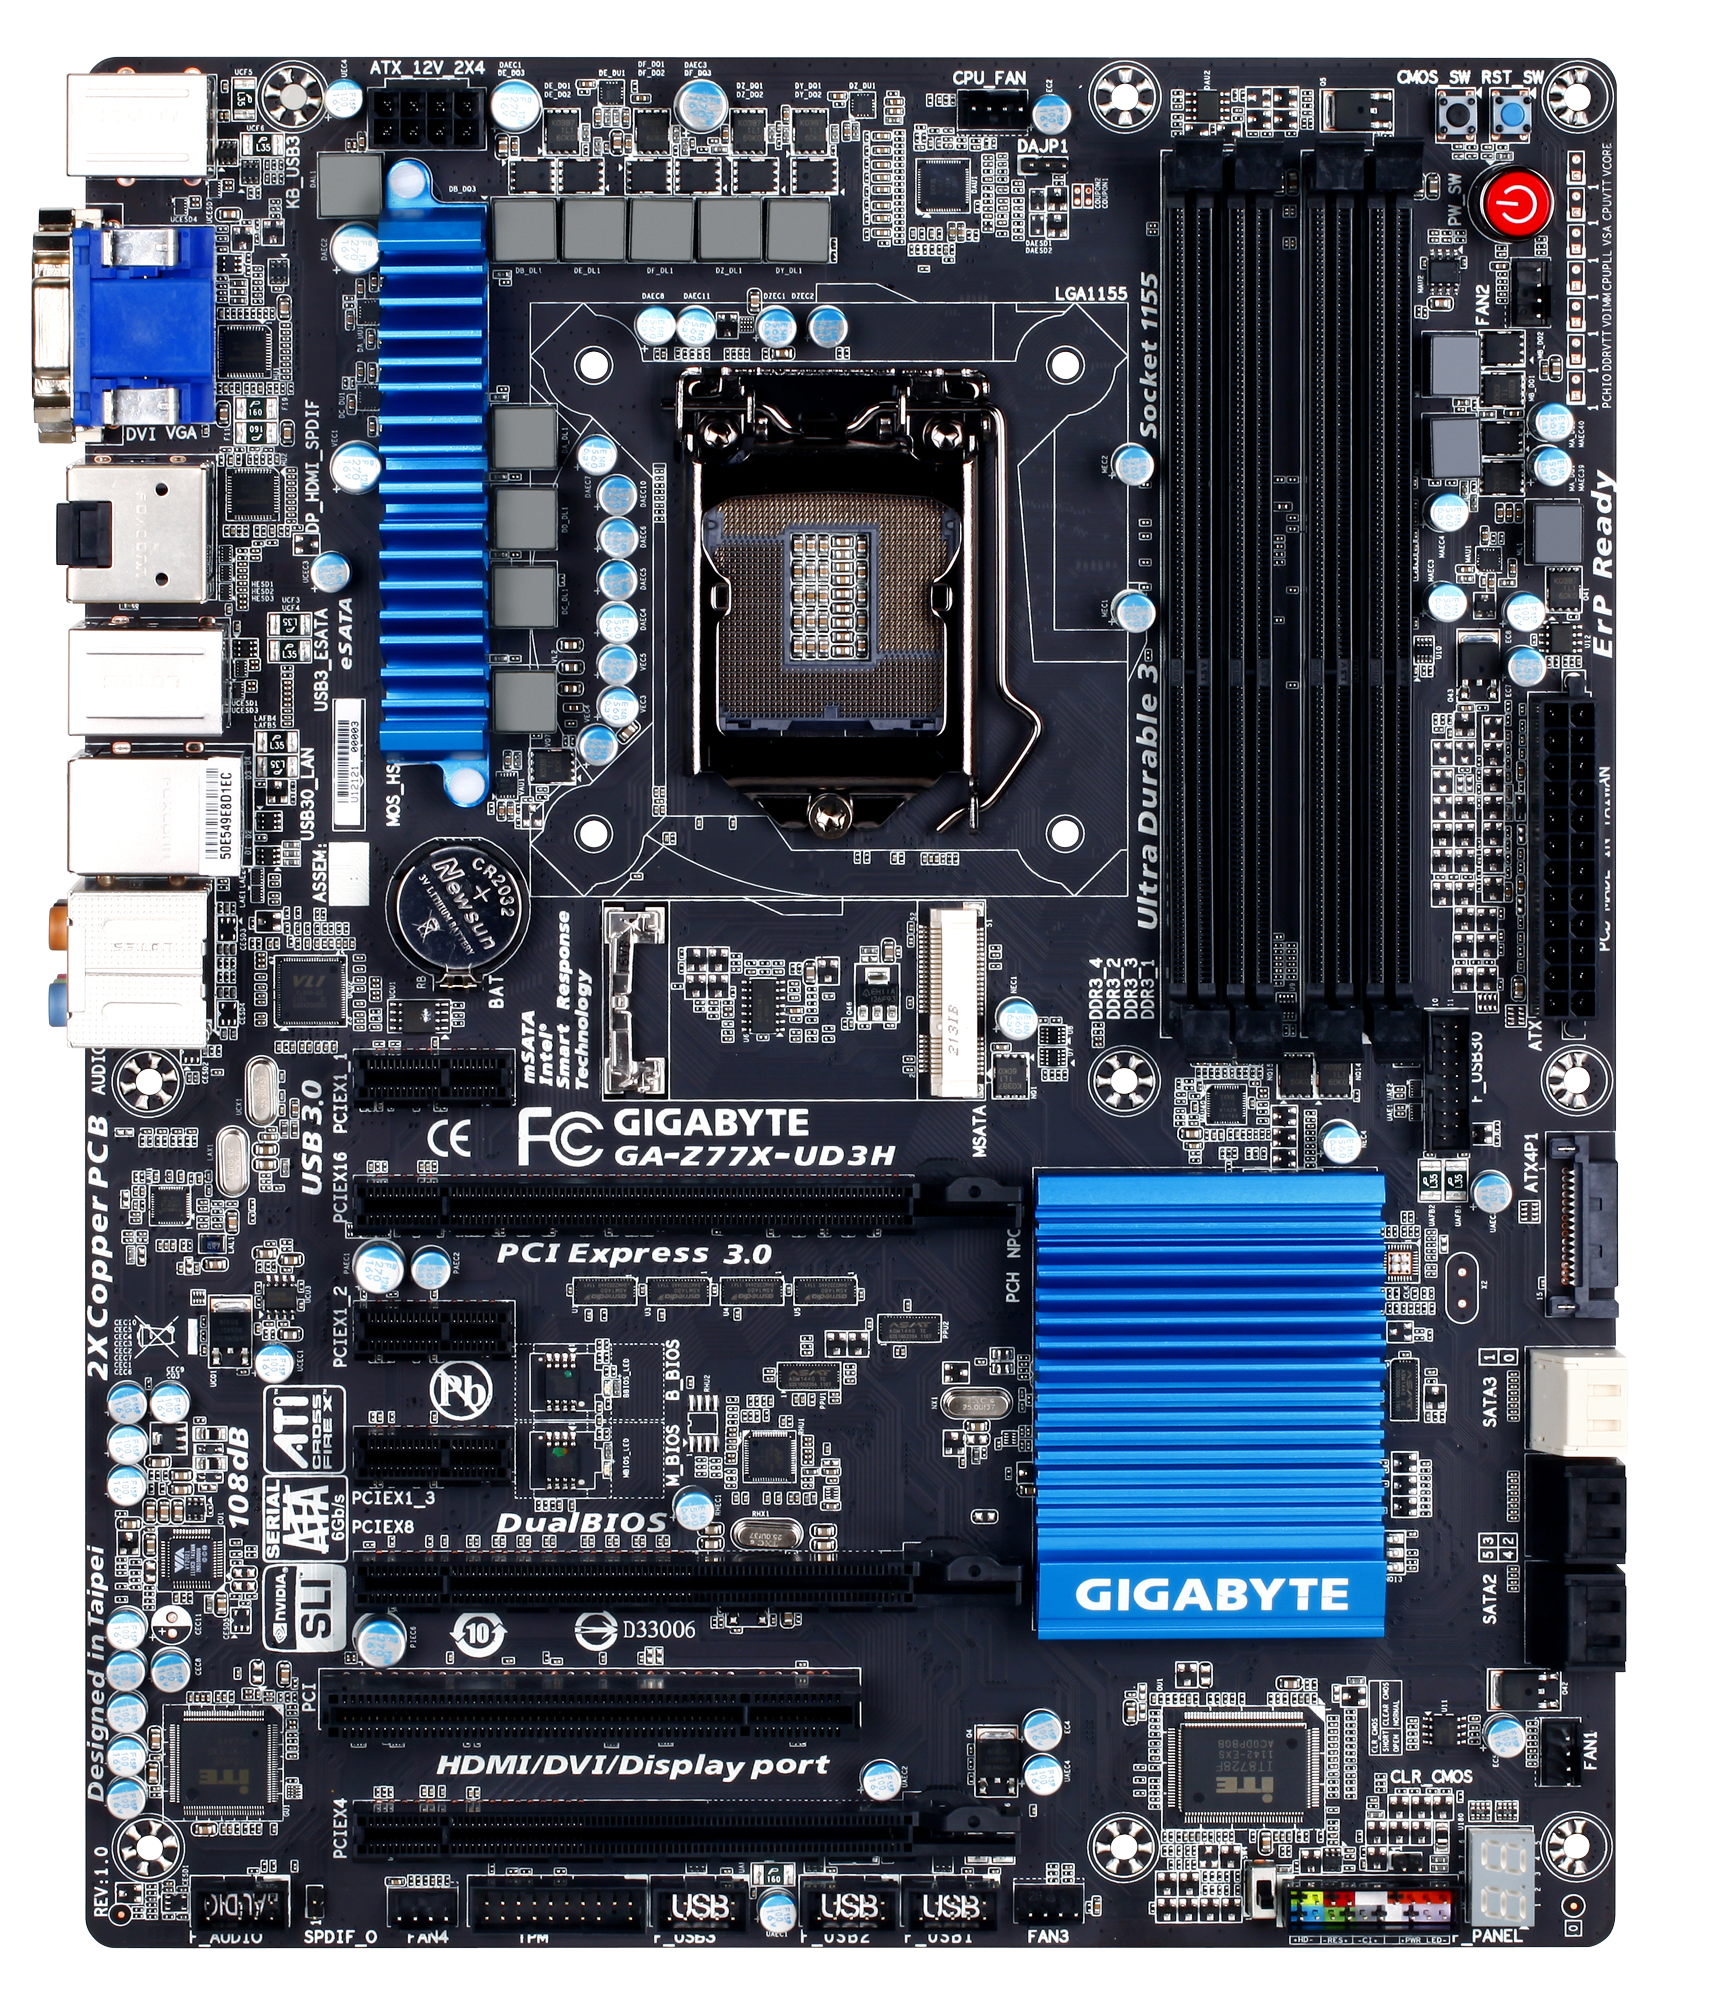 Gigabyte GA-Z77X-UD3H Wifi - Intel Z77 Panther Point Chipset and 